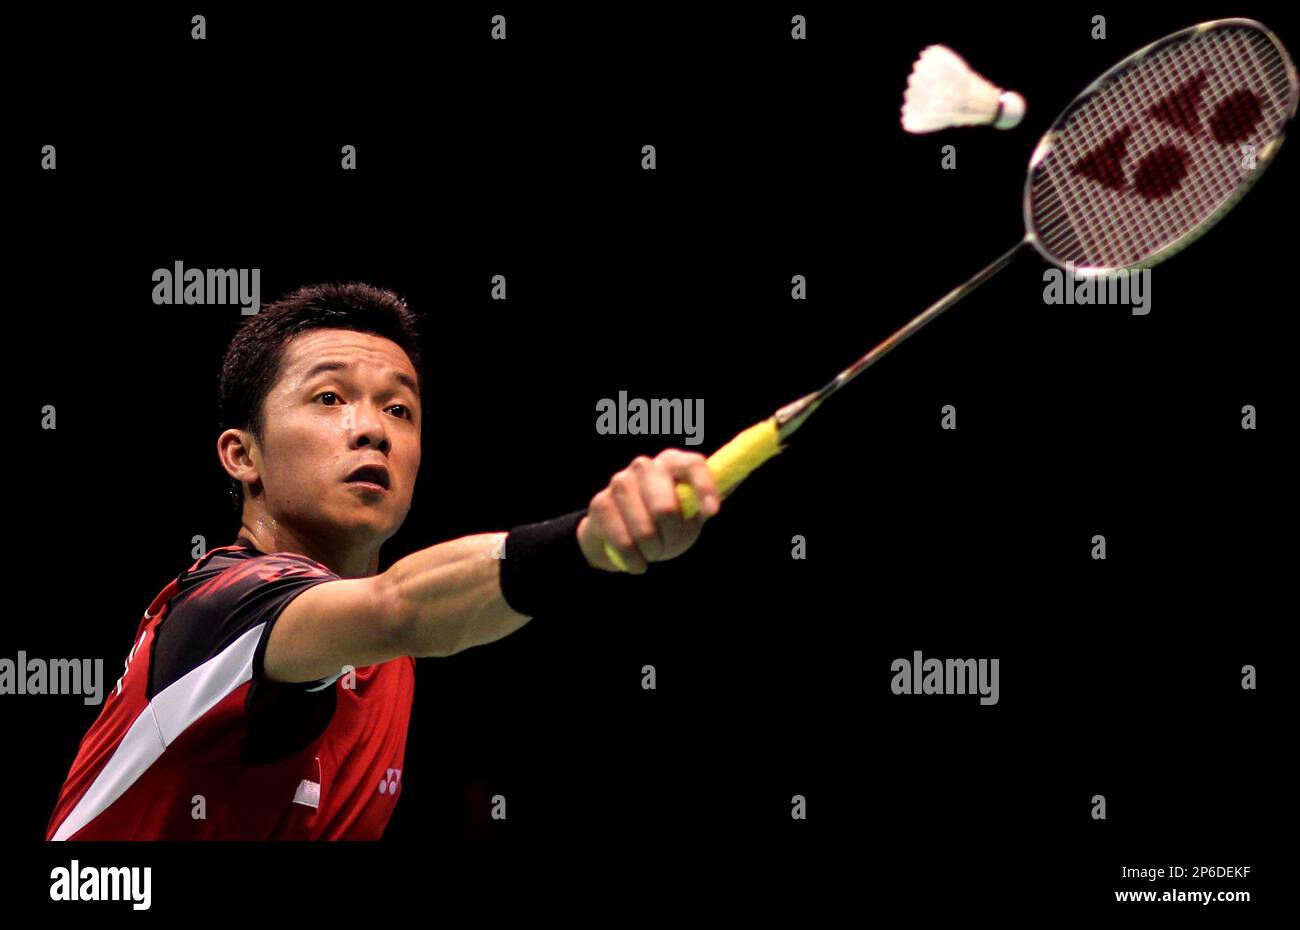 Taufik Hidayat of Indonesia returns a shot during a mens singles match against Kenichi Tago of Japan in the quarter-final round of the Thomas Cup badminton championship in Wuhan in central Chinas